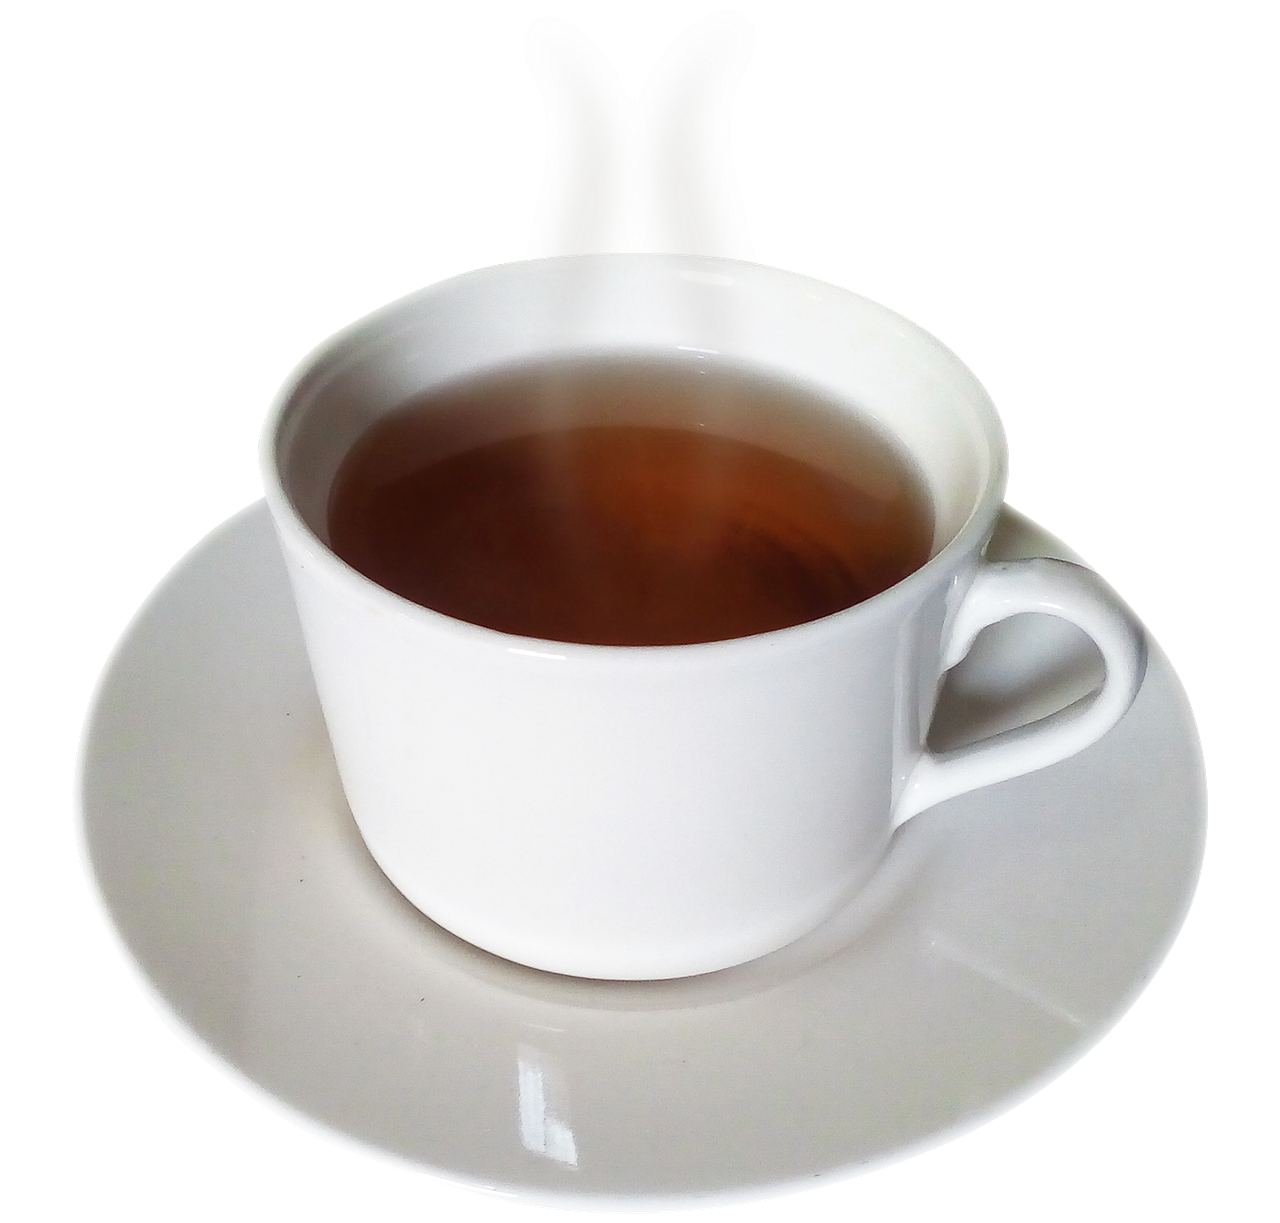 the cup tea png free photo